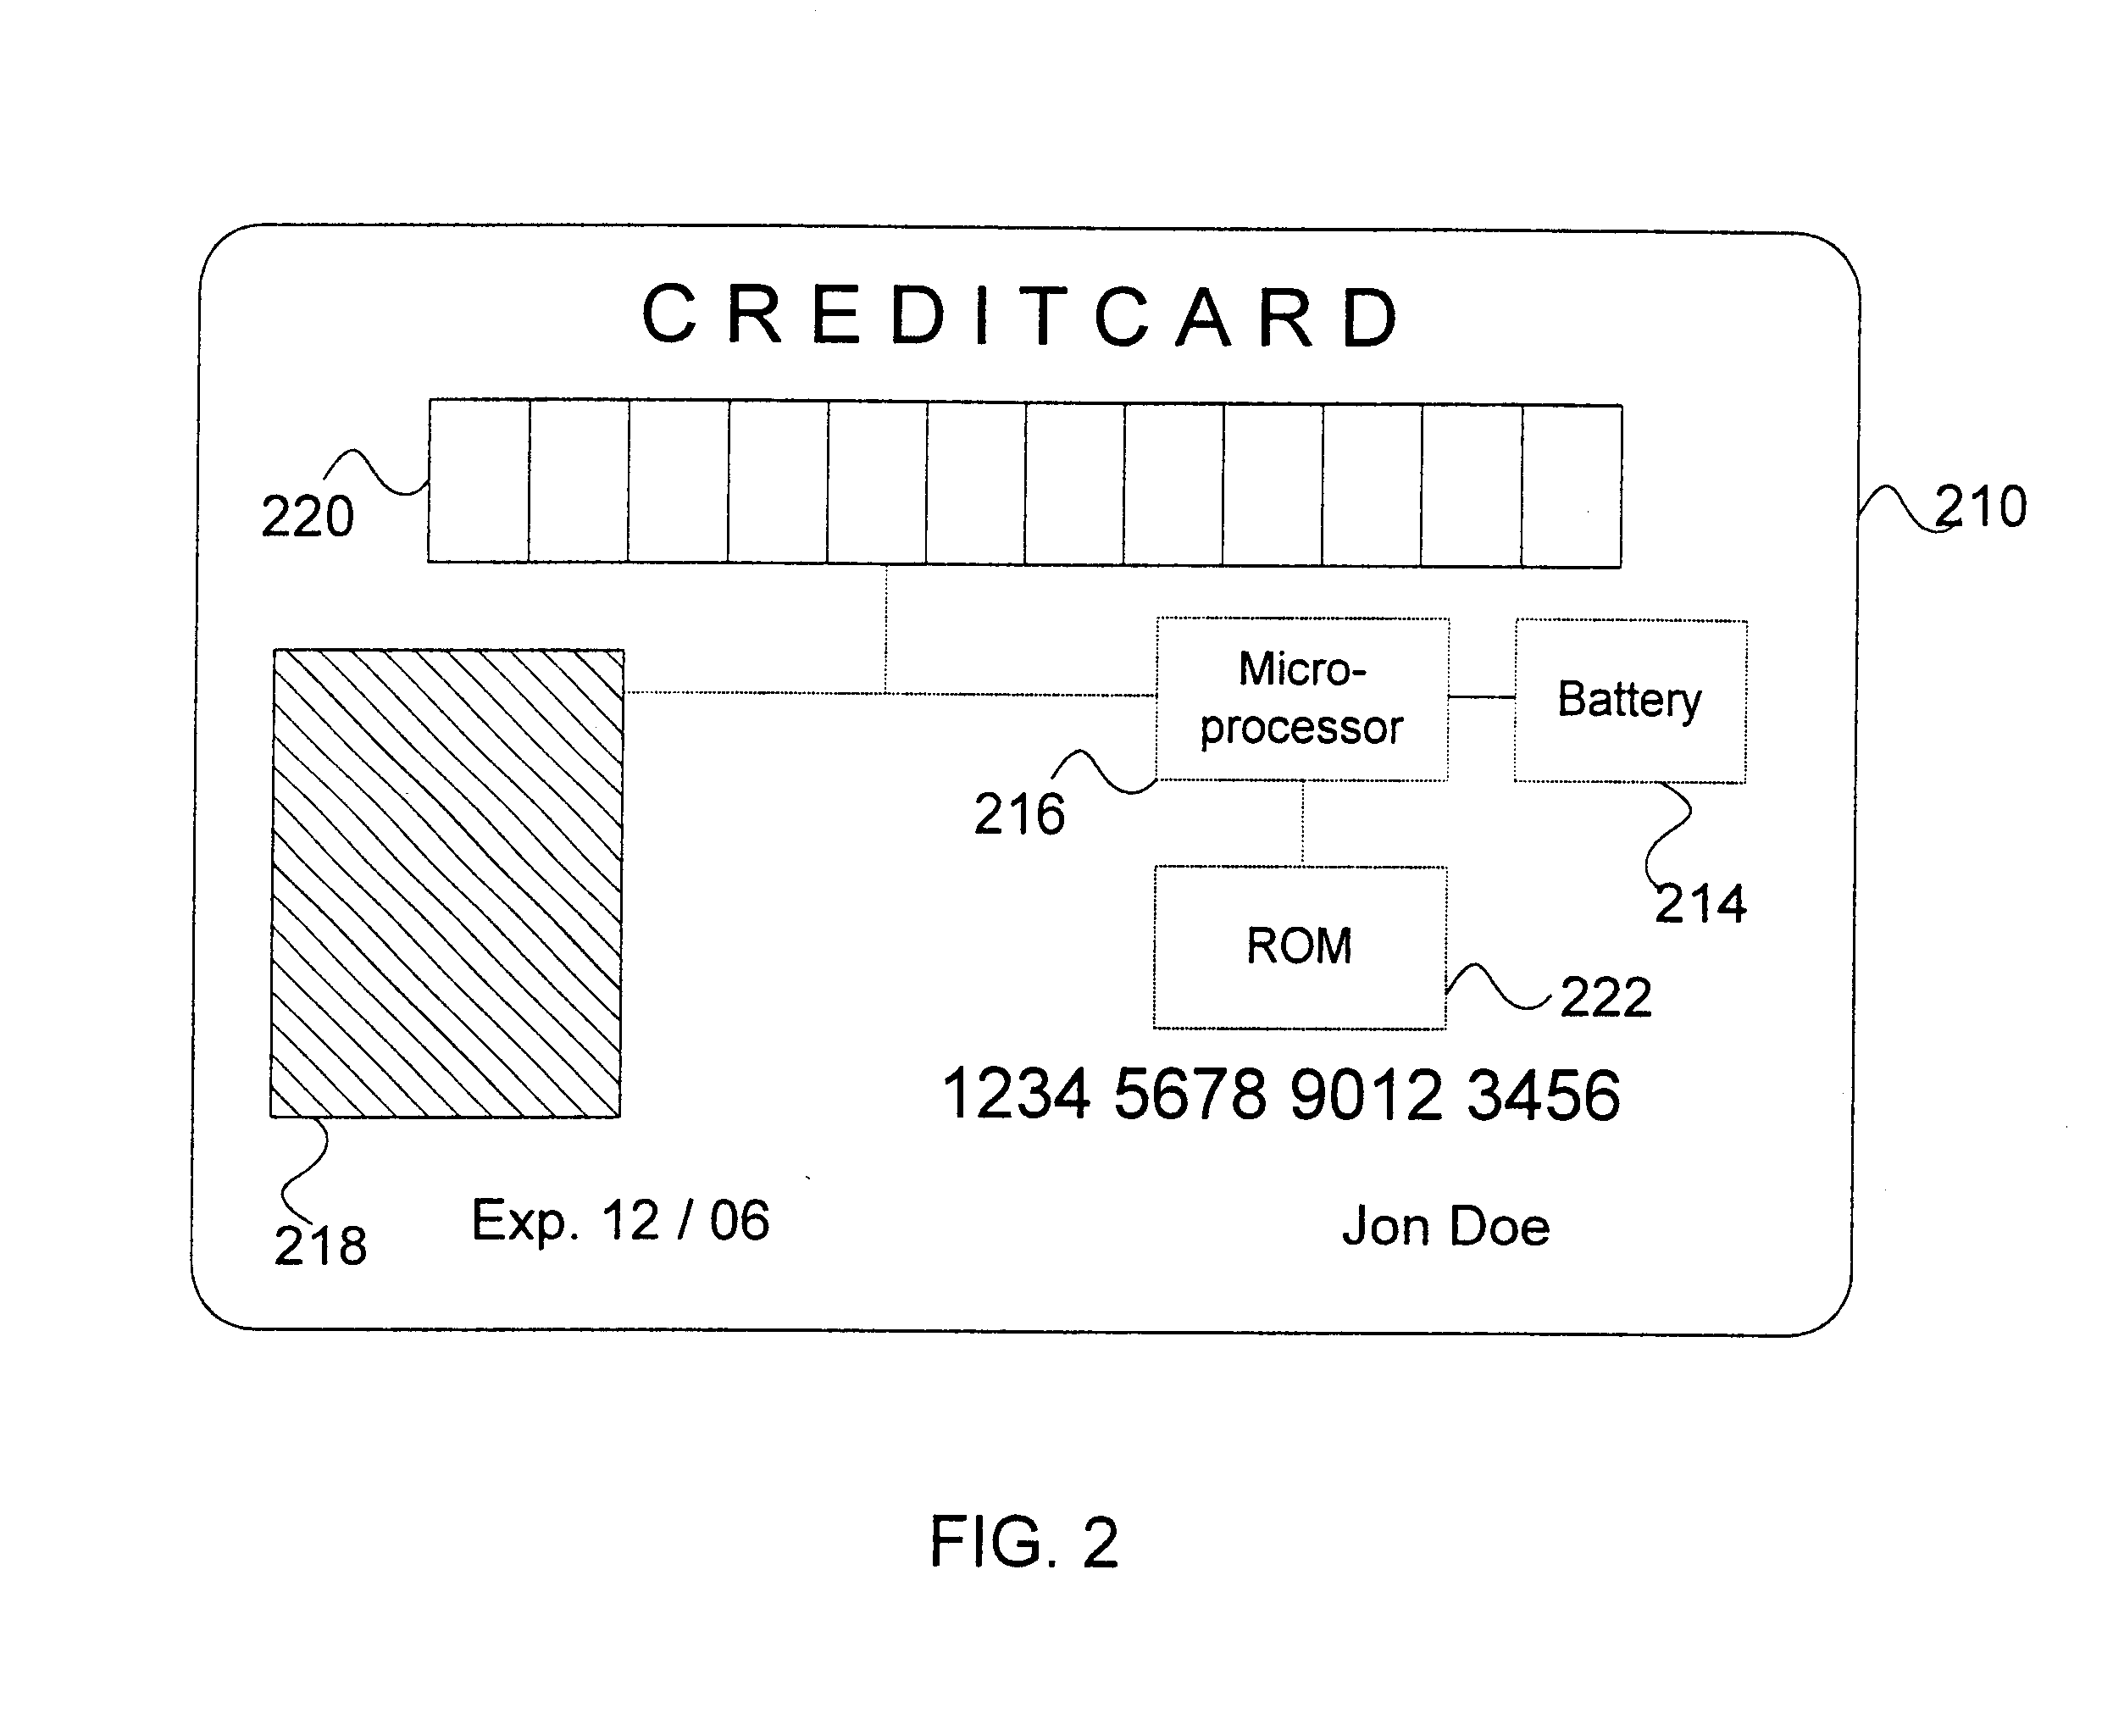 Bio-metric smart card, bio-metric smart card reader and method of use